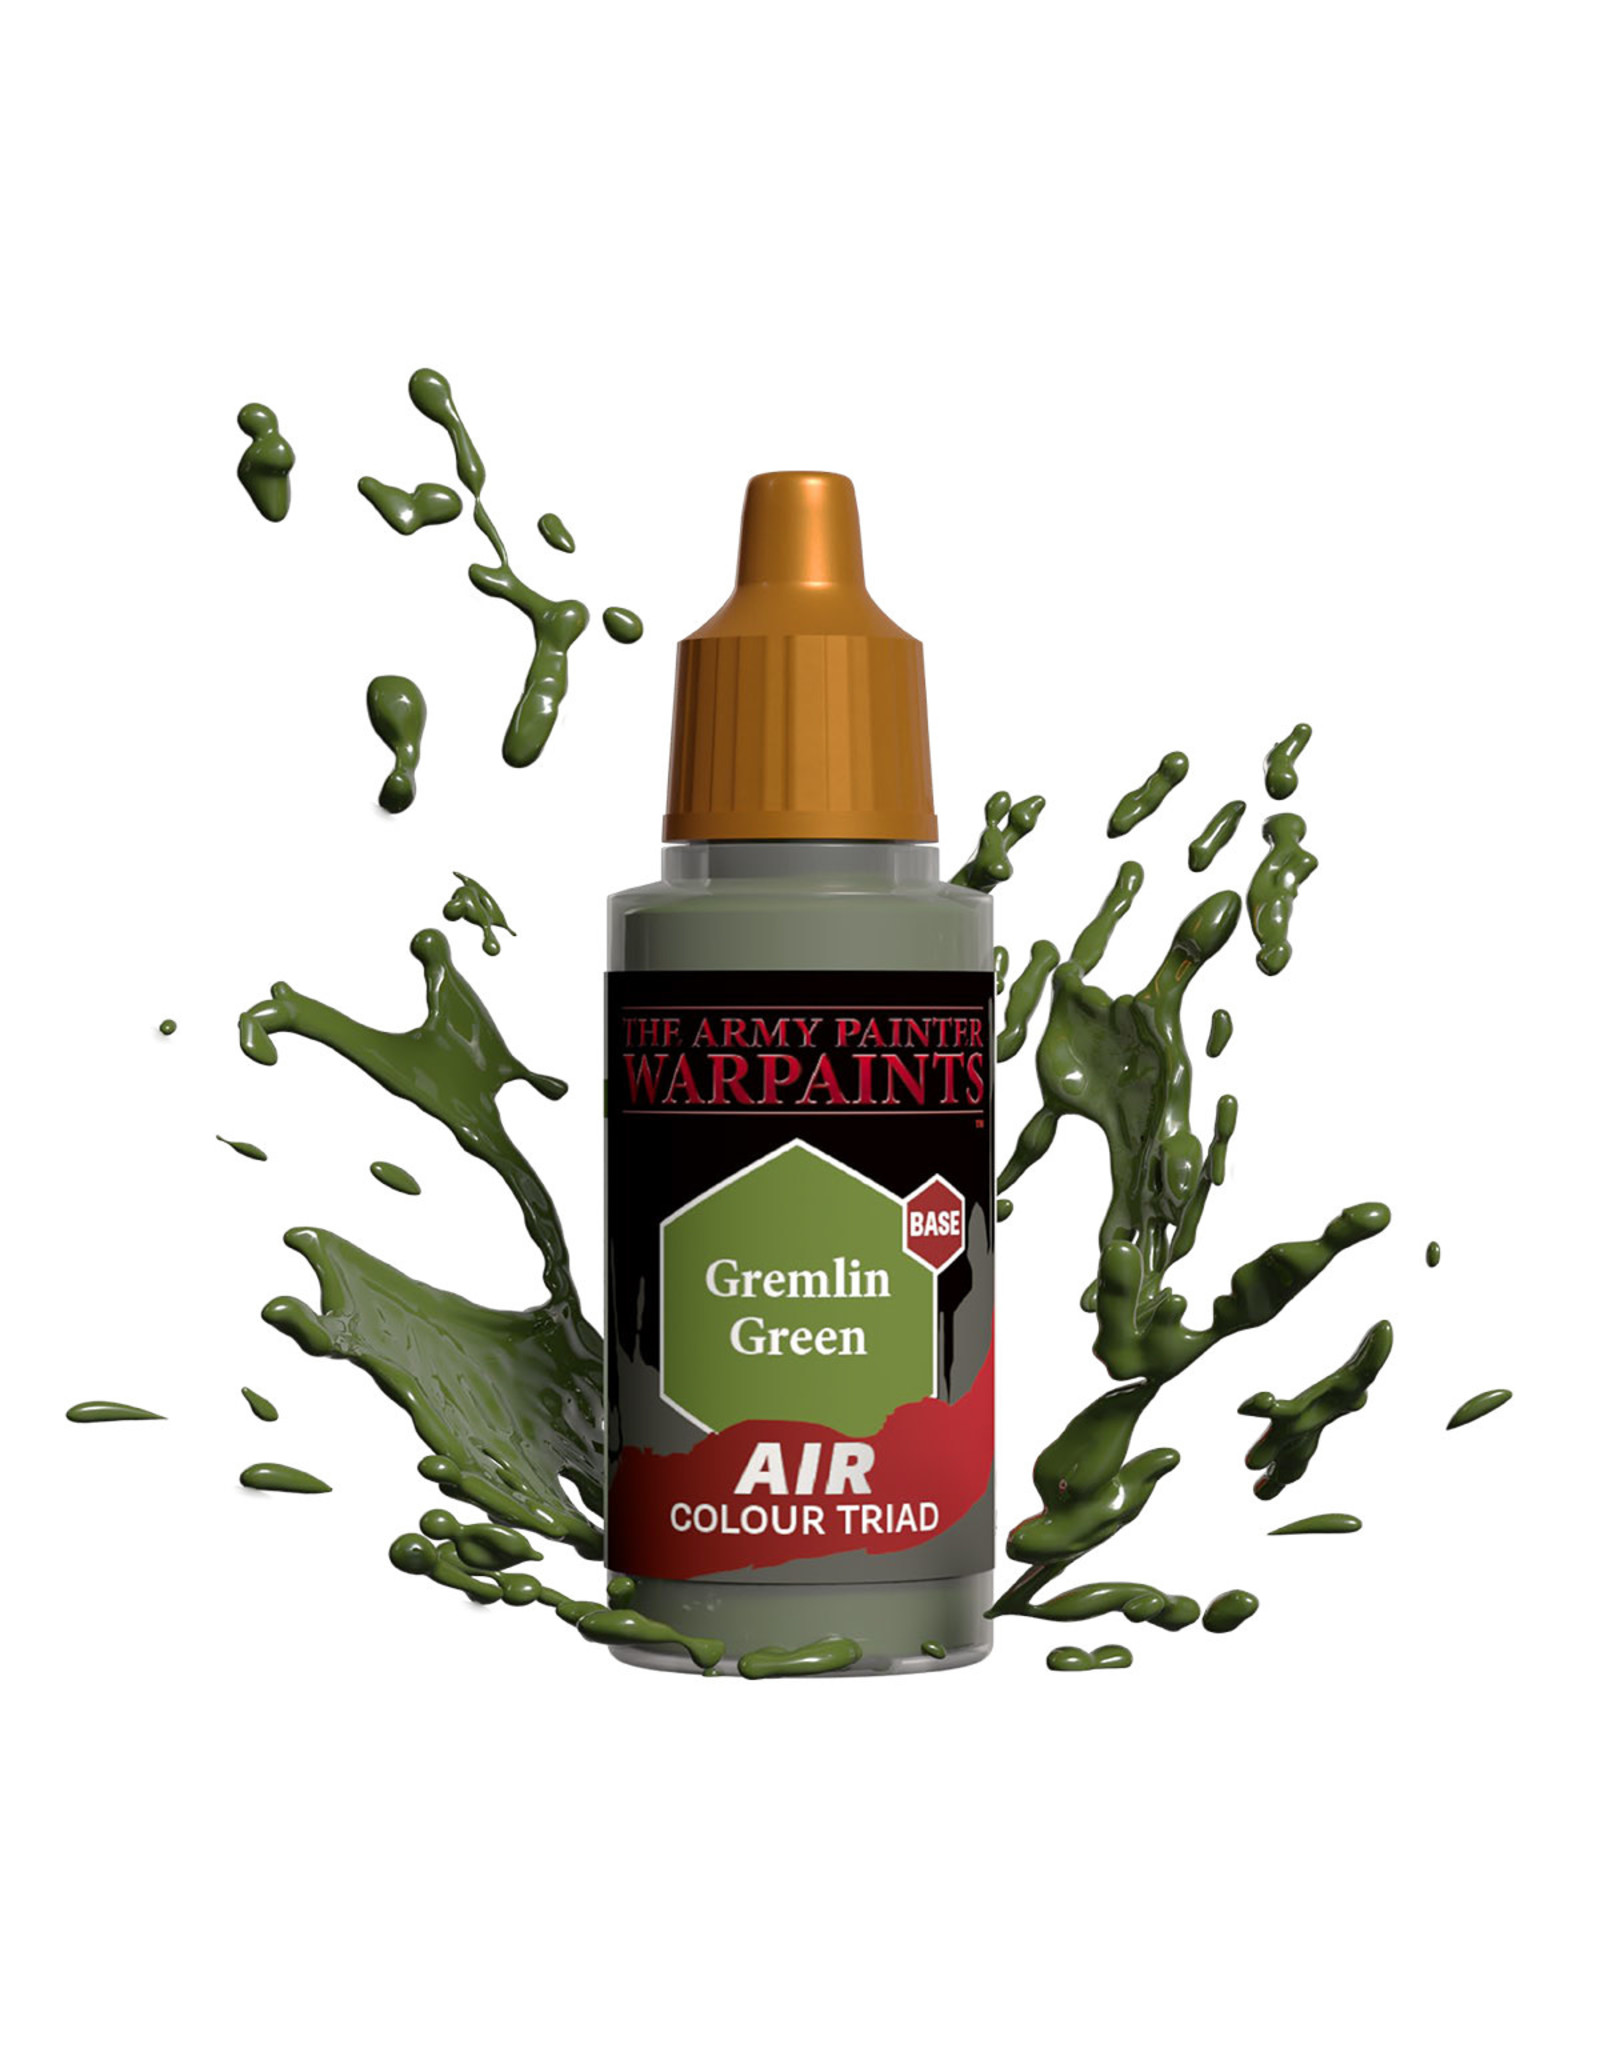 The Army Painter The Army Painter Warpaints Air: Gremlin Green